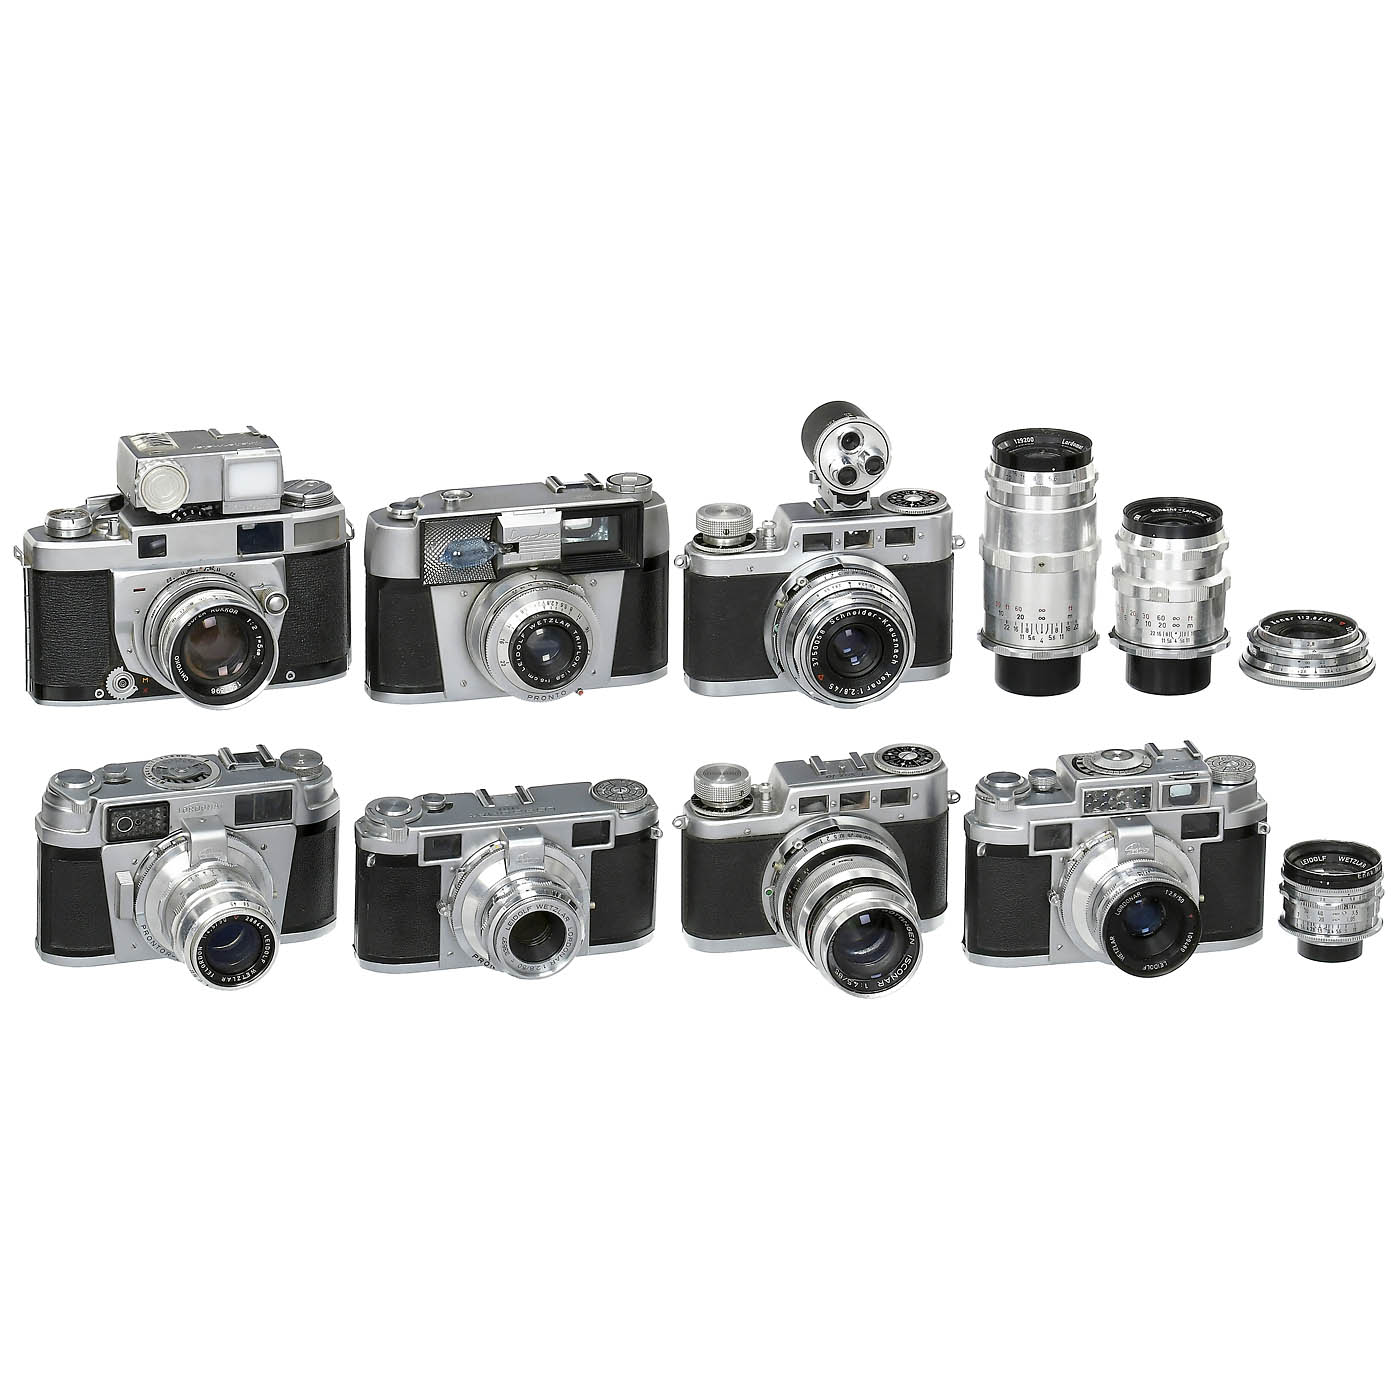 Modular 35mm Cameras with Interchangeable Lenses - Image 2 of 3